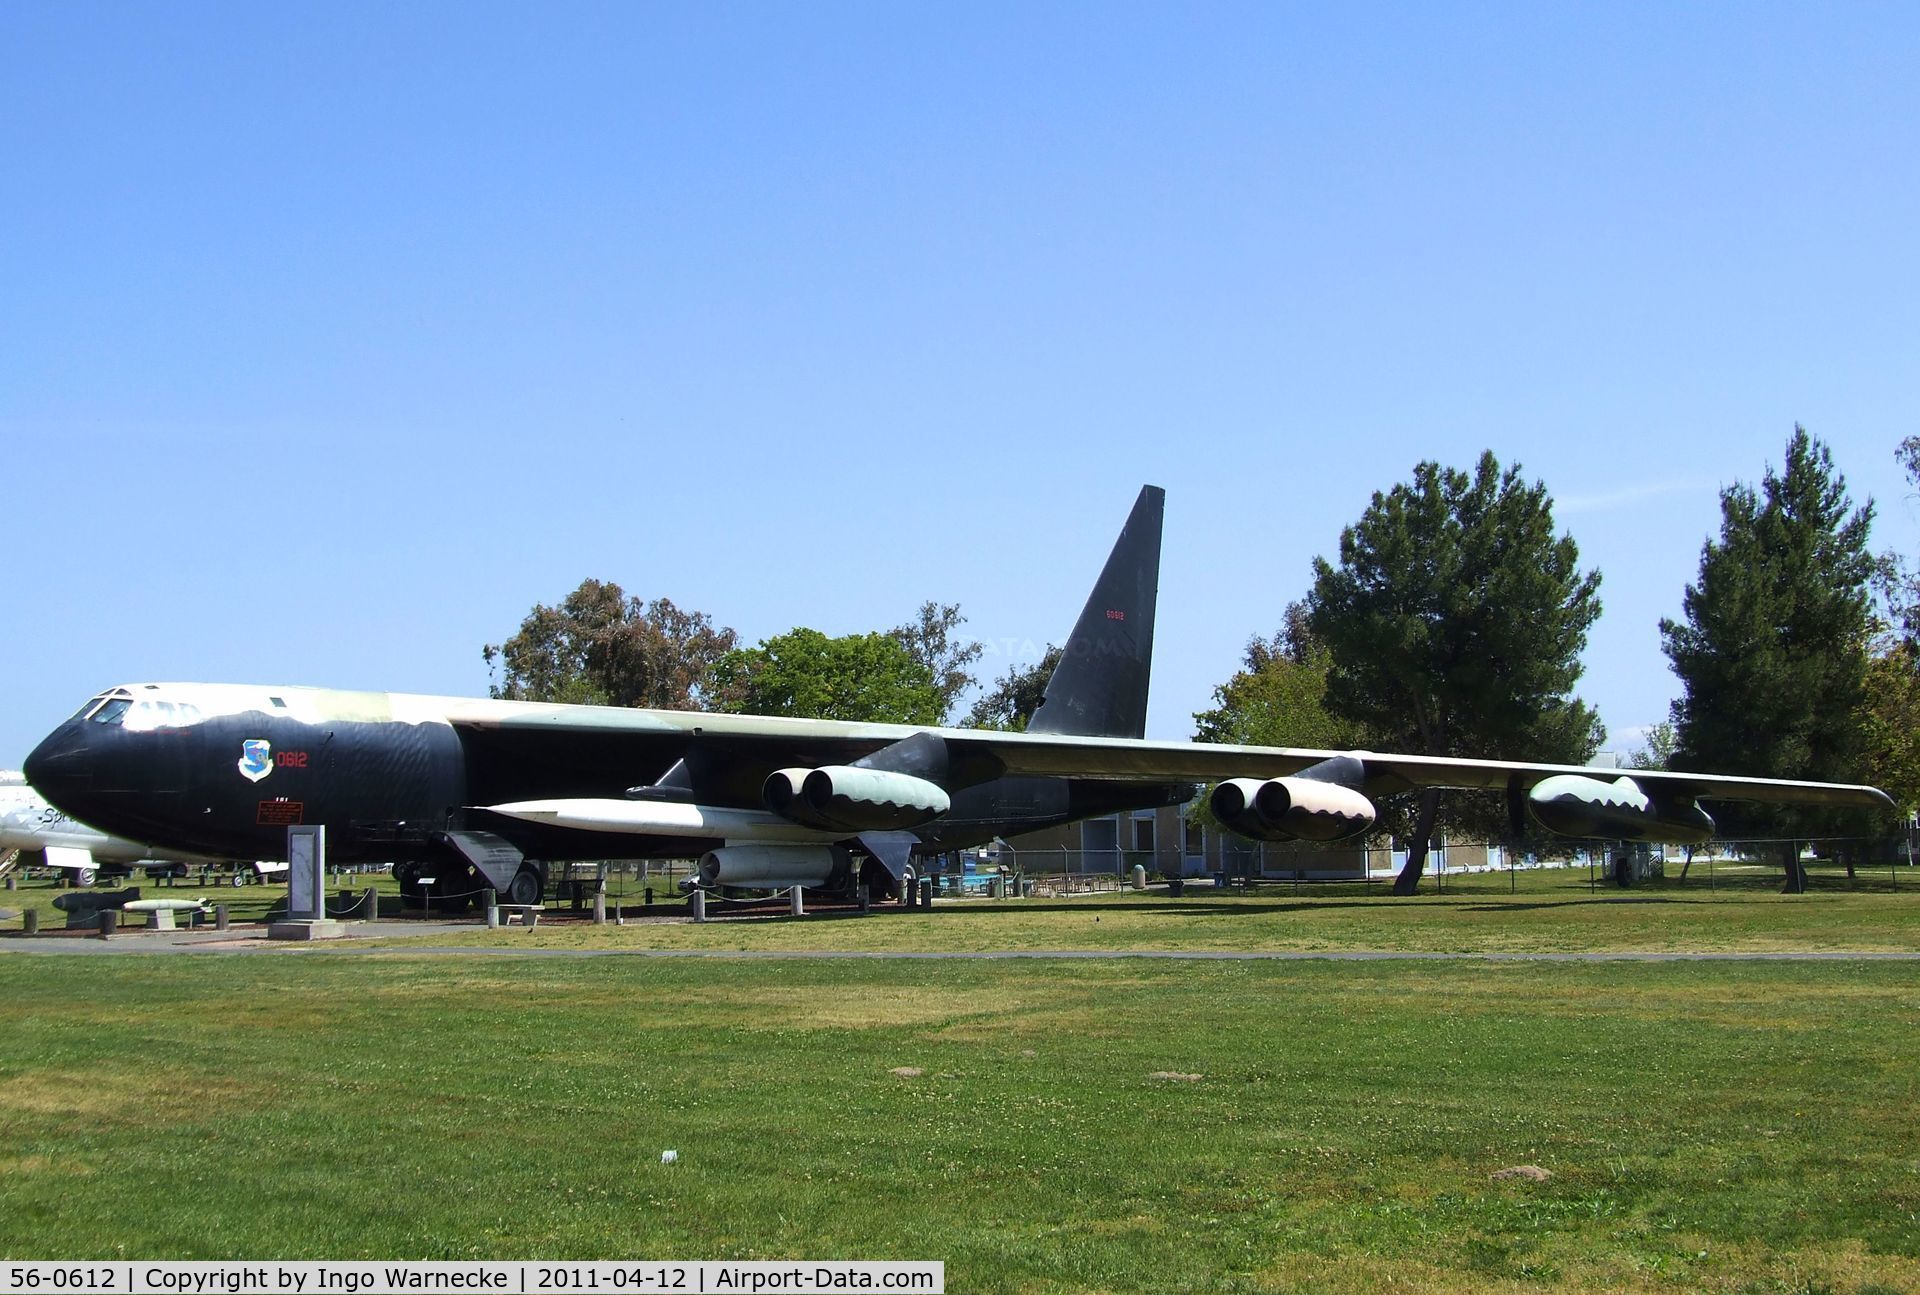 56-0612, 1957 Boeing B-52D-80-BO Stratofortress C/N 17295, Boeing B-52D Stratofortress at the Castle Air Museum, Atwater CA